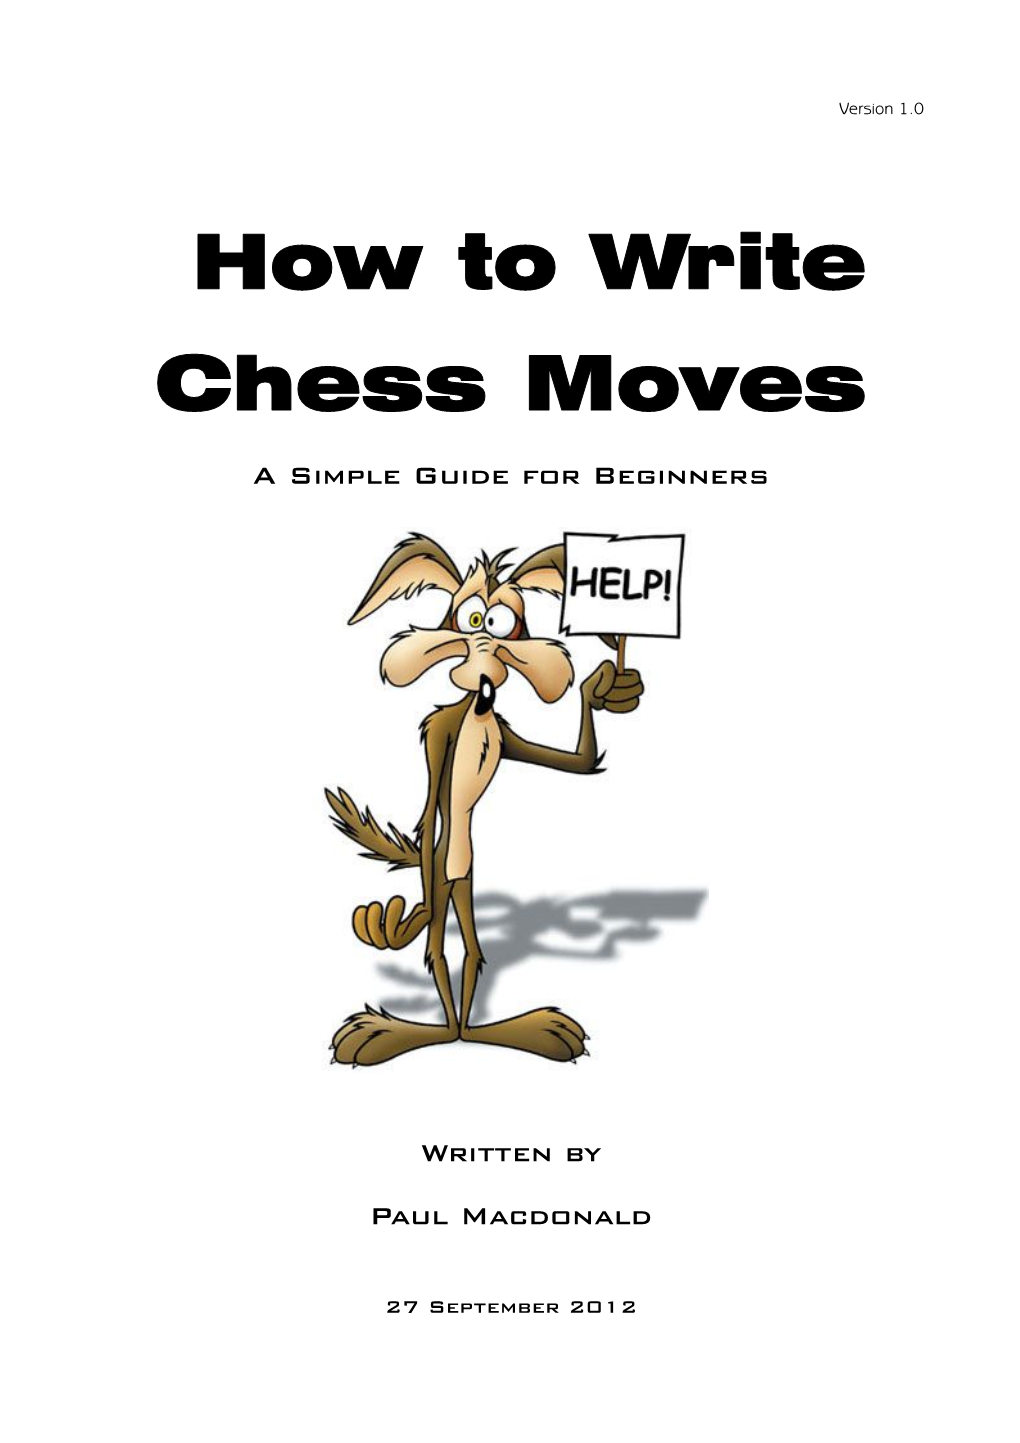 How to Write Chess Moves